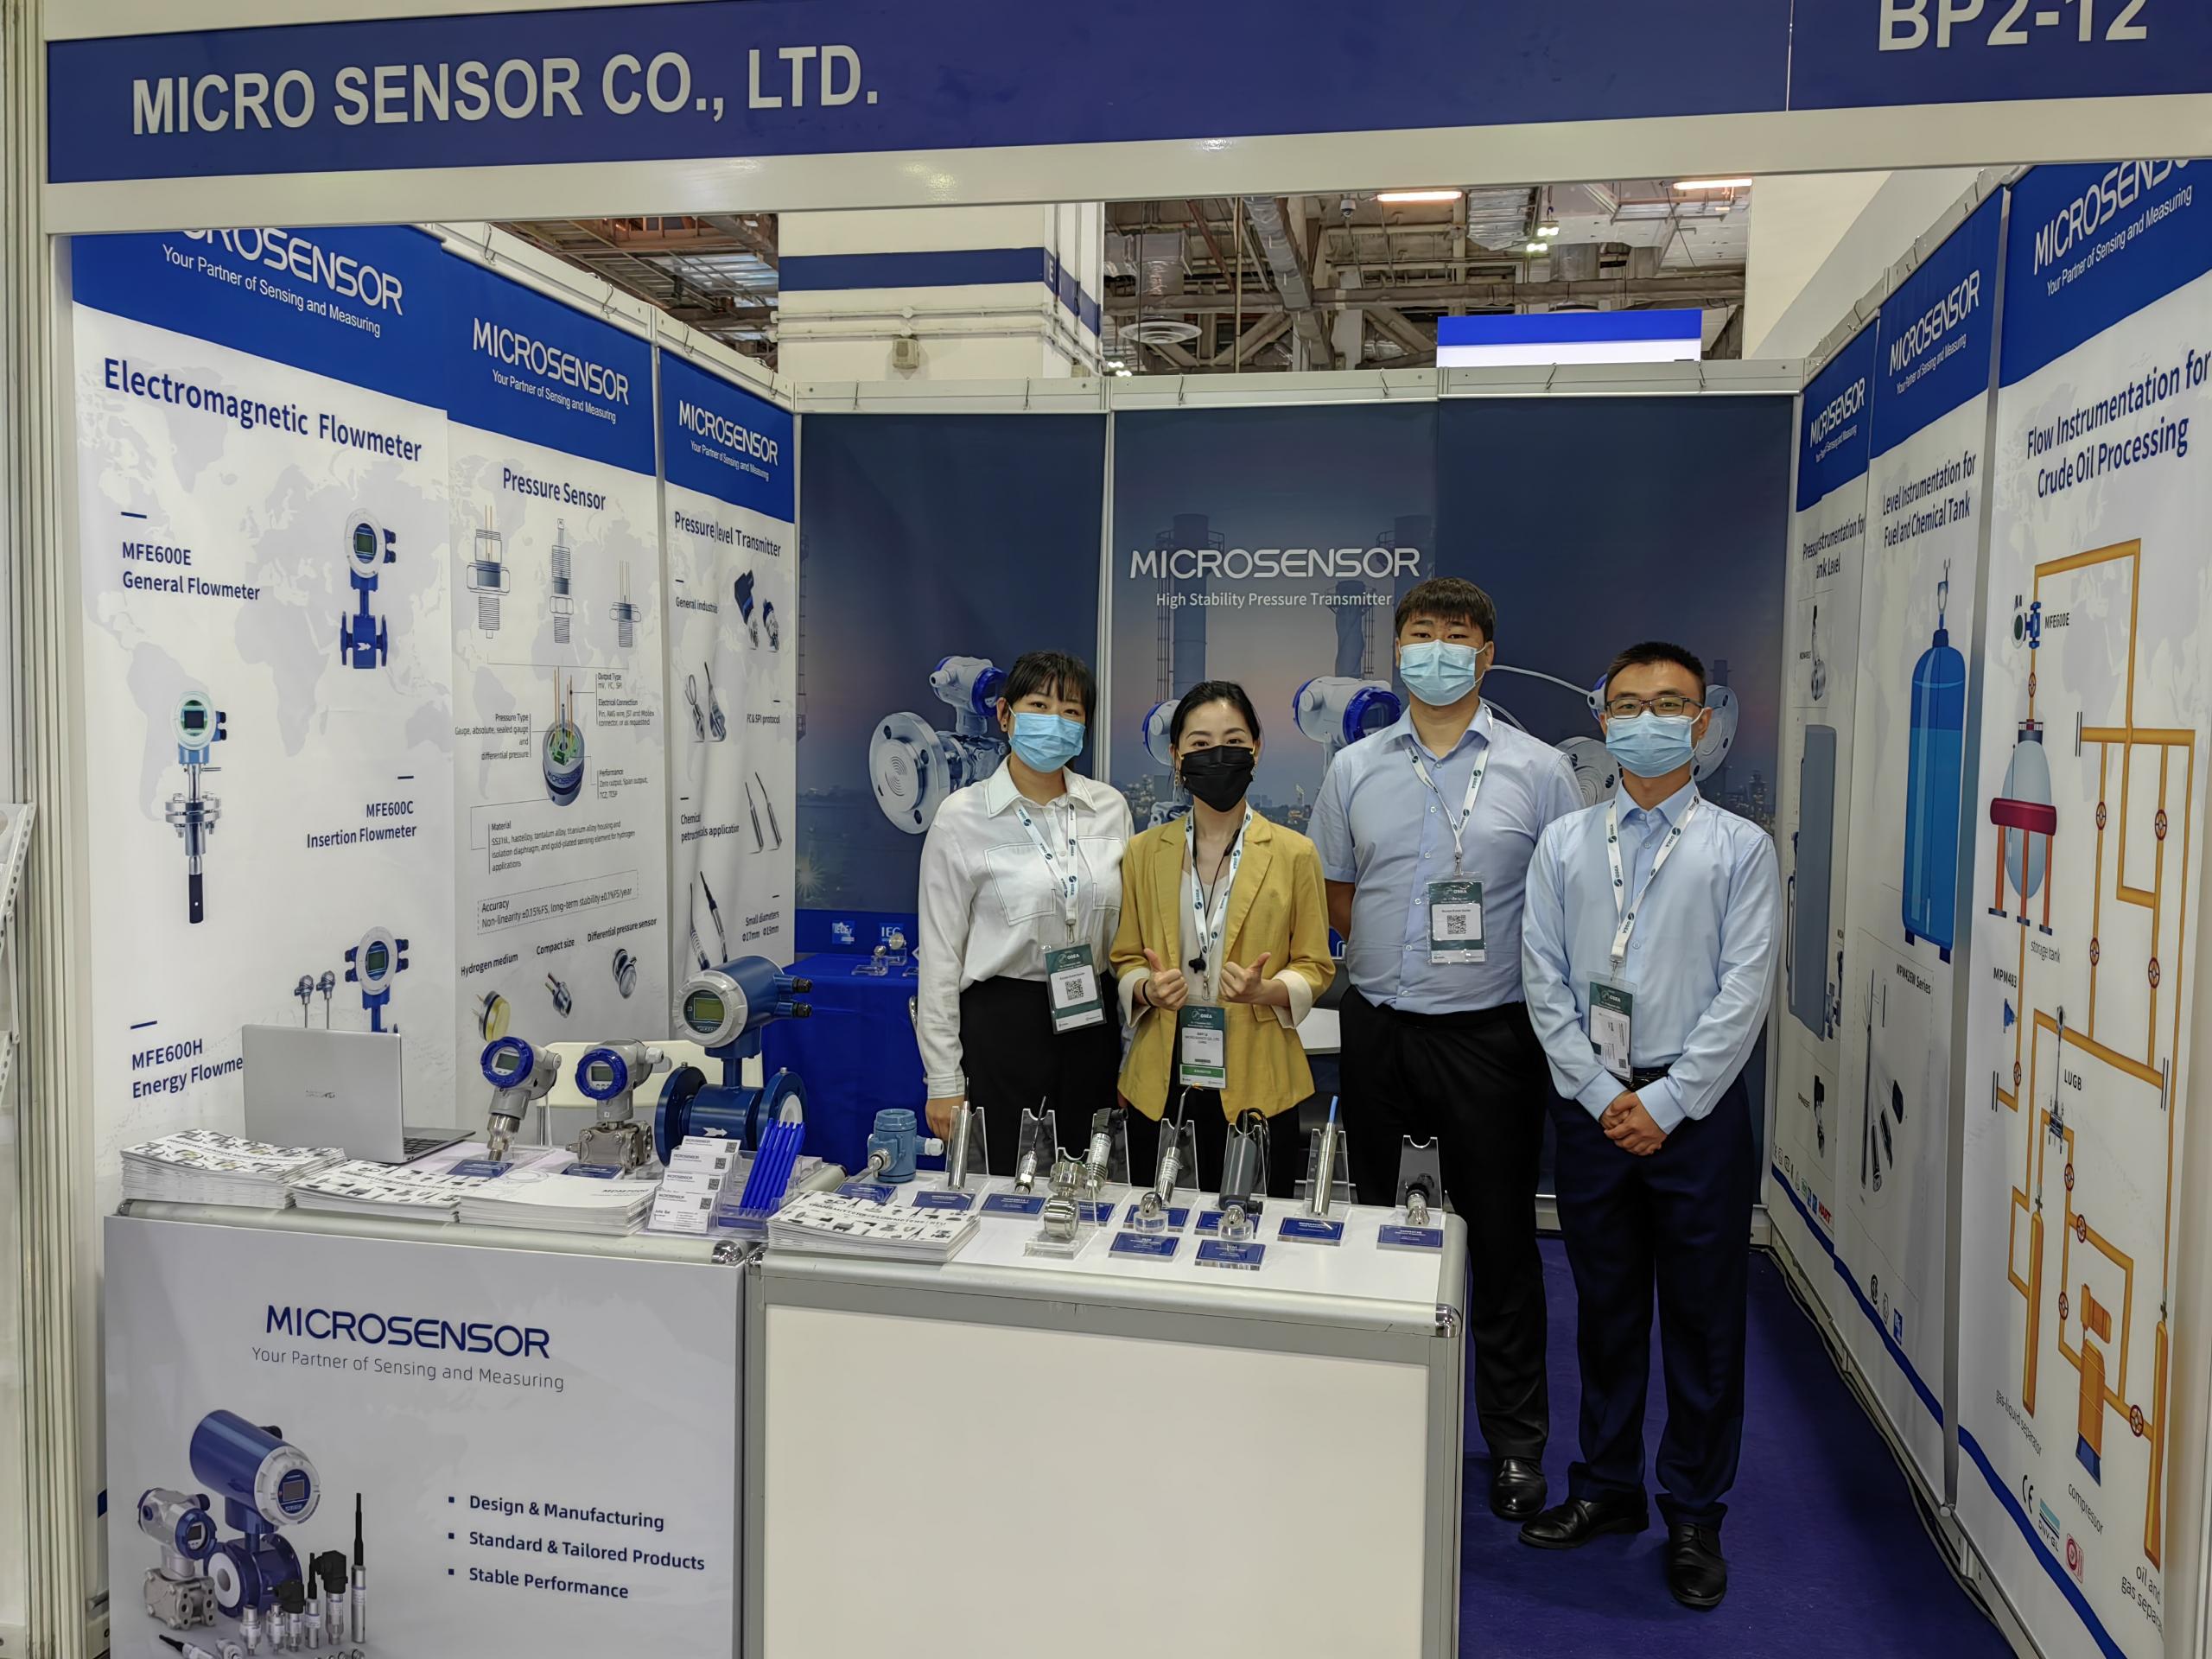 From November 15th to 17th, Micro Sensor went to Singapore to participate in the largest oil and gas industry event in Asia - OSEA2022. 